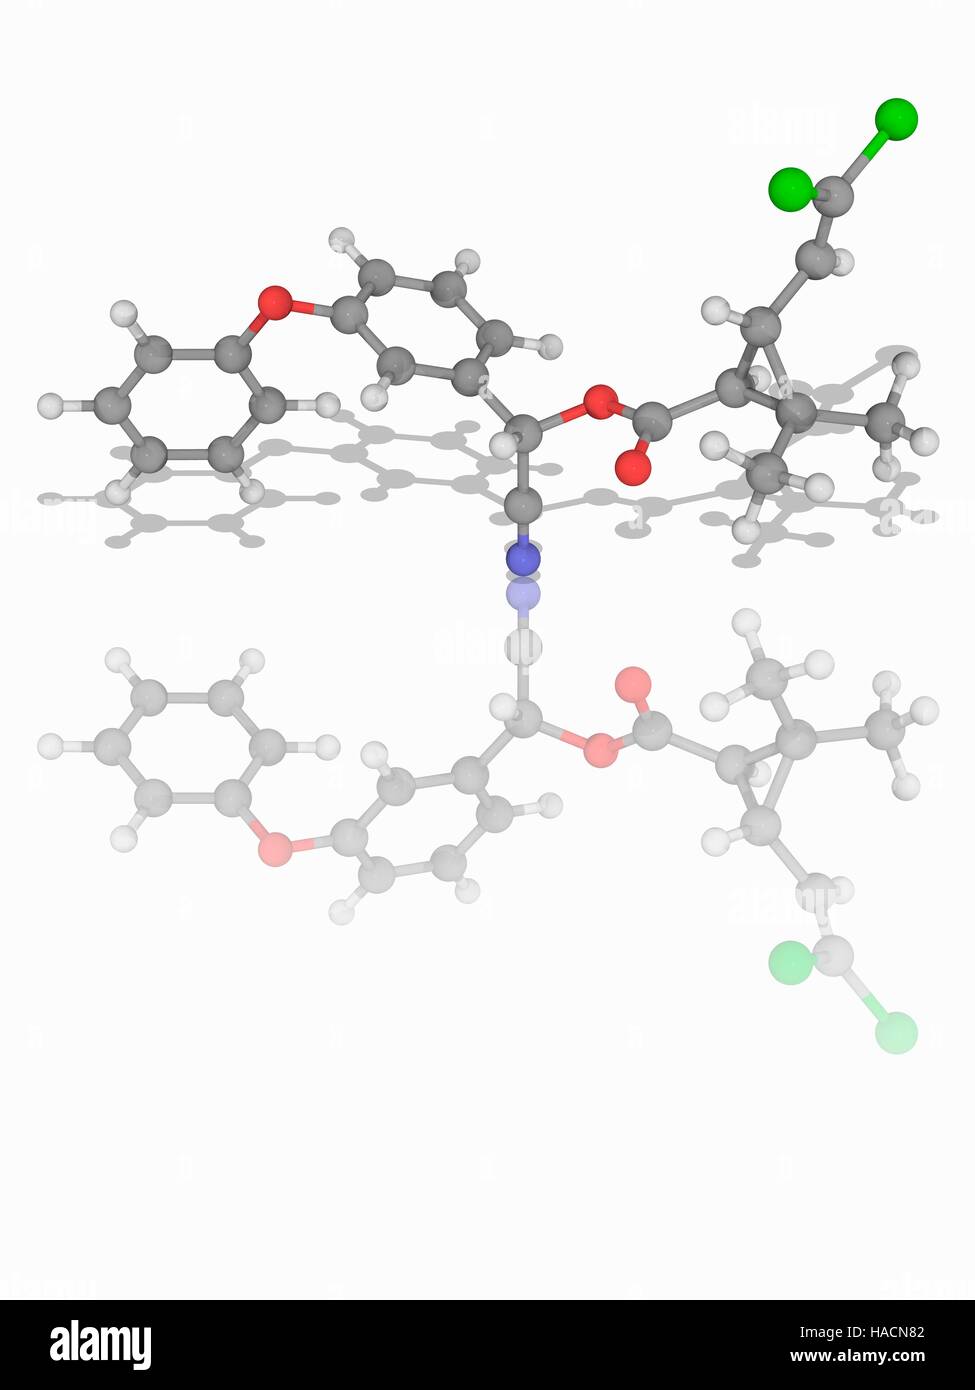 Cypermethrin. Molecular model of the synthetic organic compound cypermethrin (C22.H19.Cl2.N.O3), used as an insecticide. Atoms are represented as spheres and are colour-coded: carbon (grey), hydrogen (white), nitrogen (blue), oxygen (red) and chlorine (green). Illustration. Stock Photo